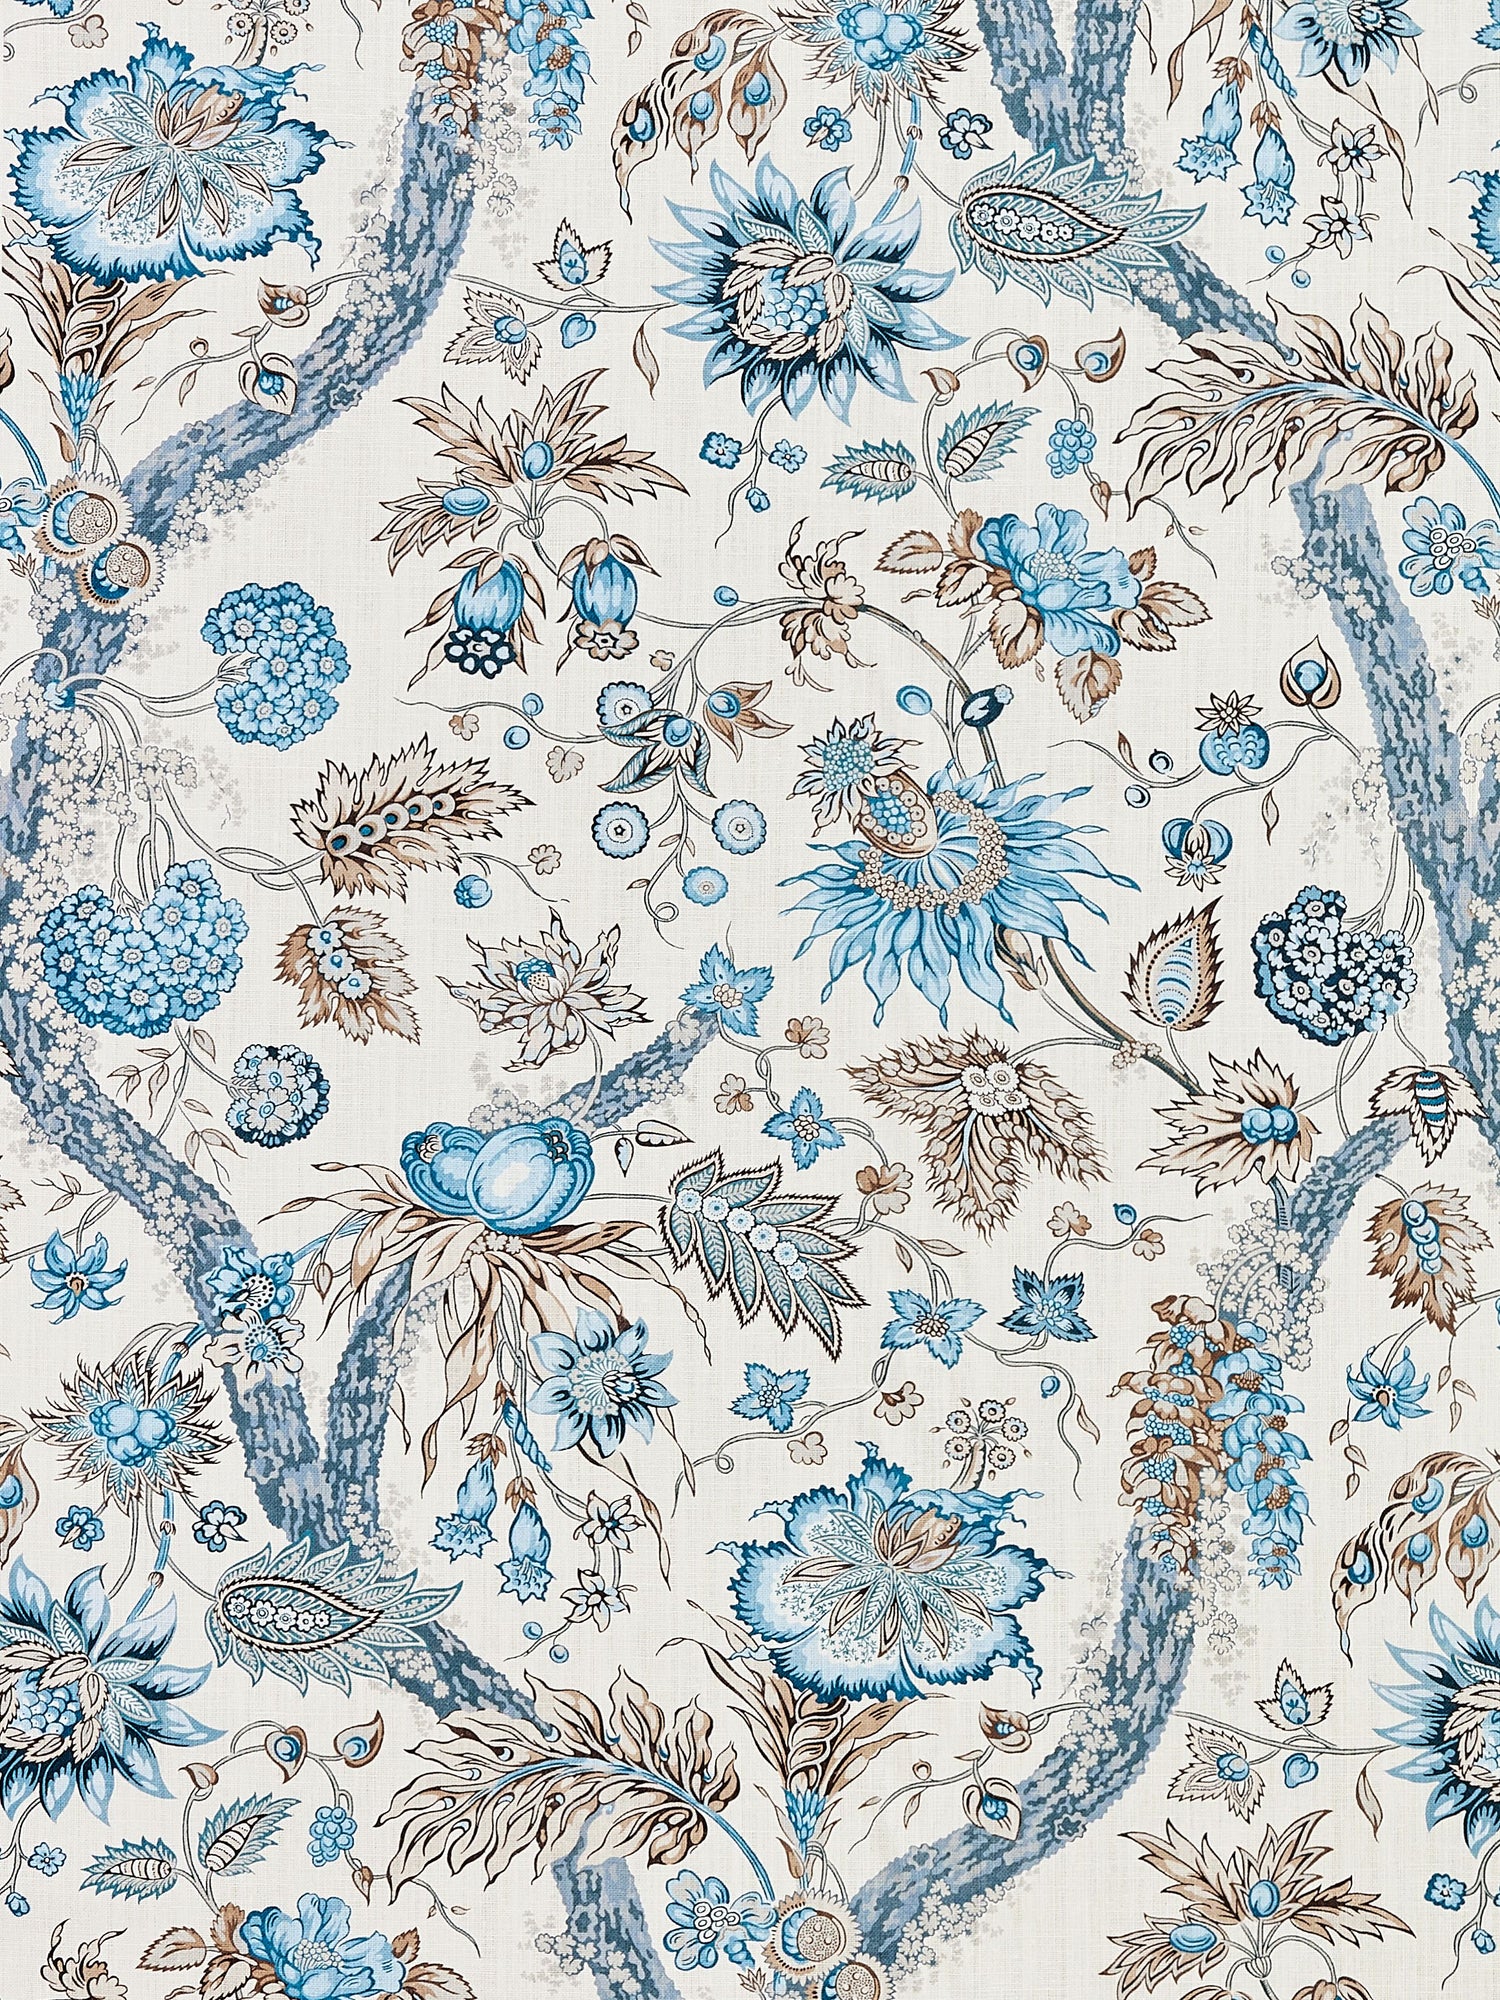 Fleurs Tropicales fabric in water&